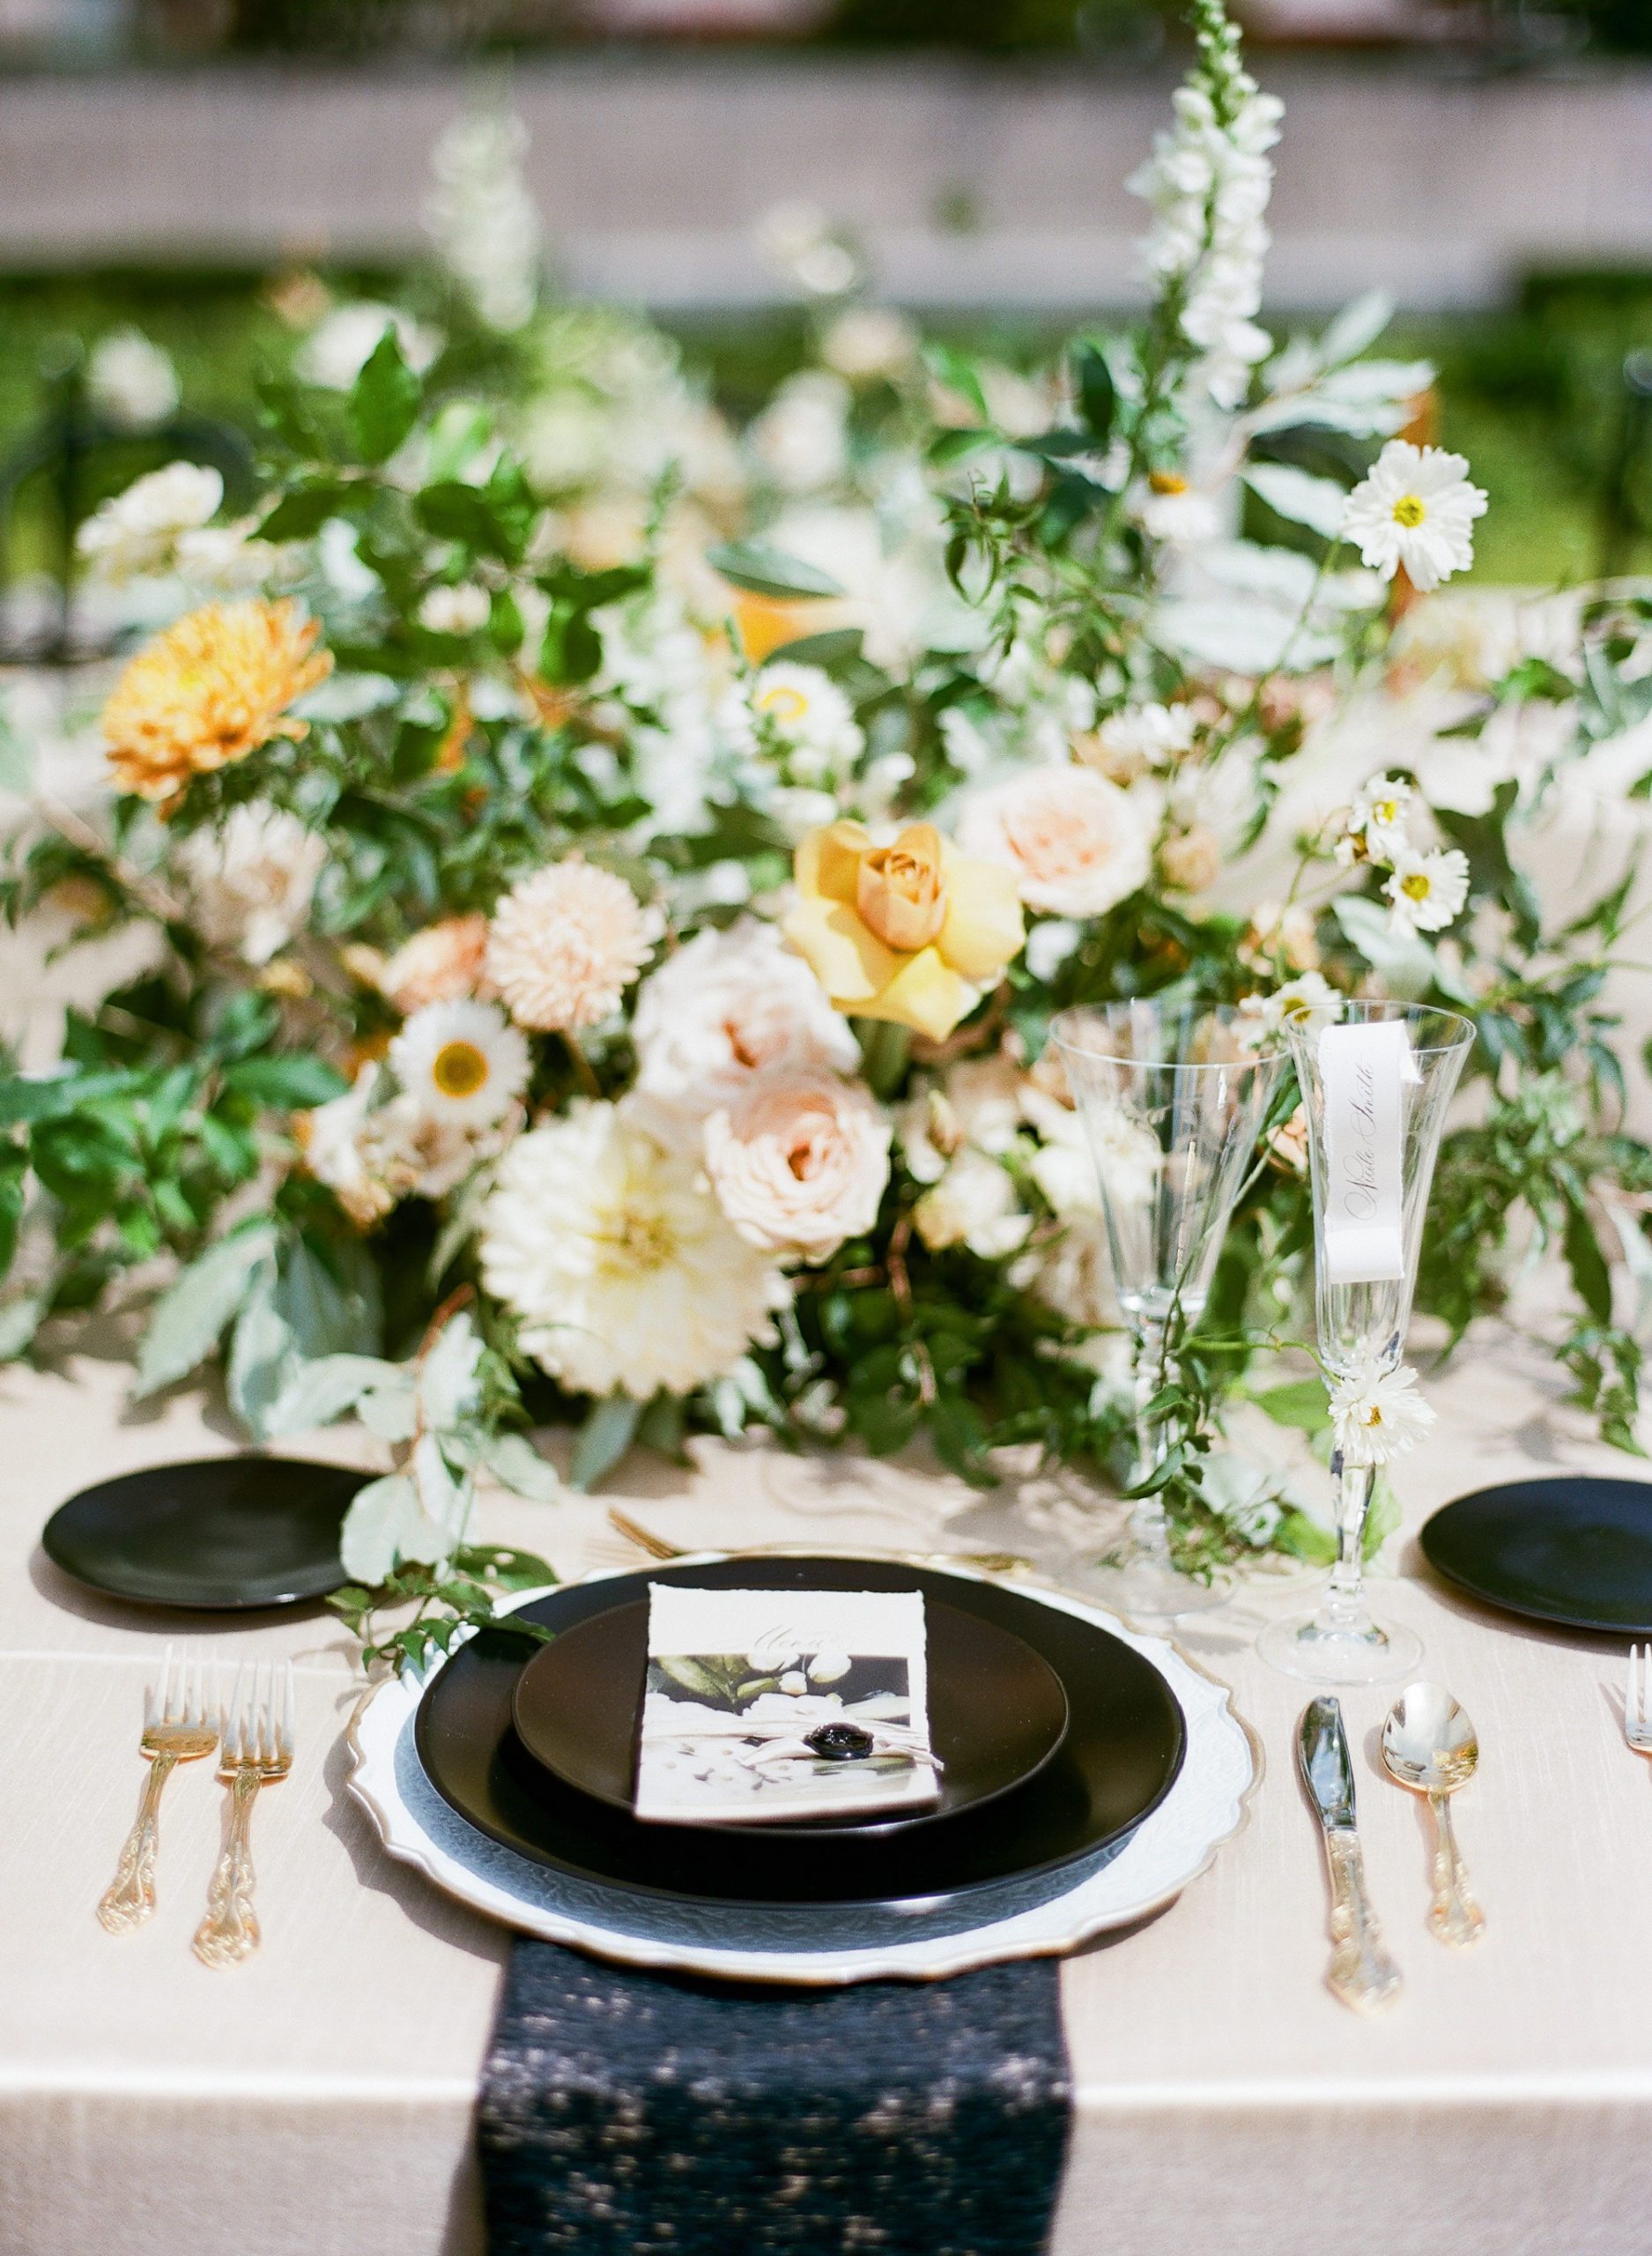 Wedding Reception Table with Black Plates and Yellow Flowers Photo